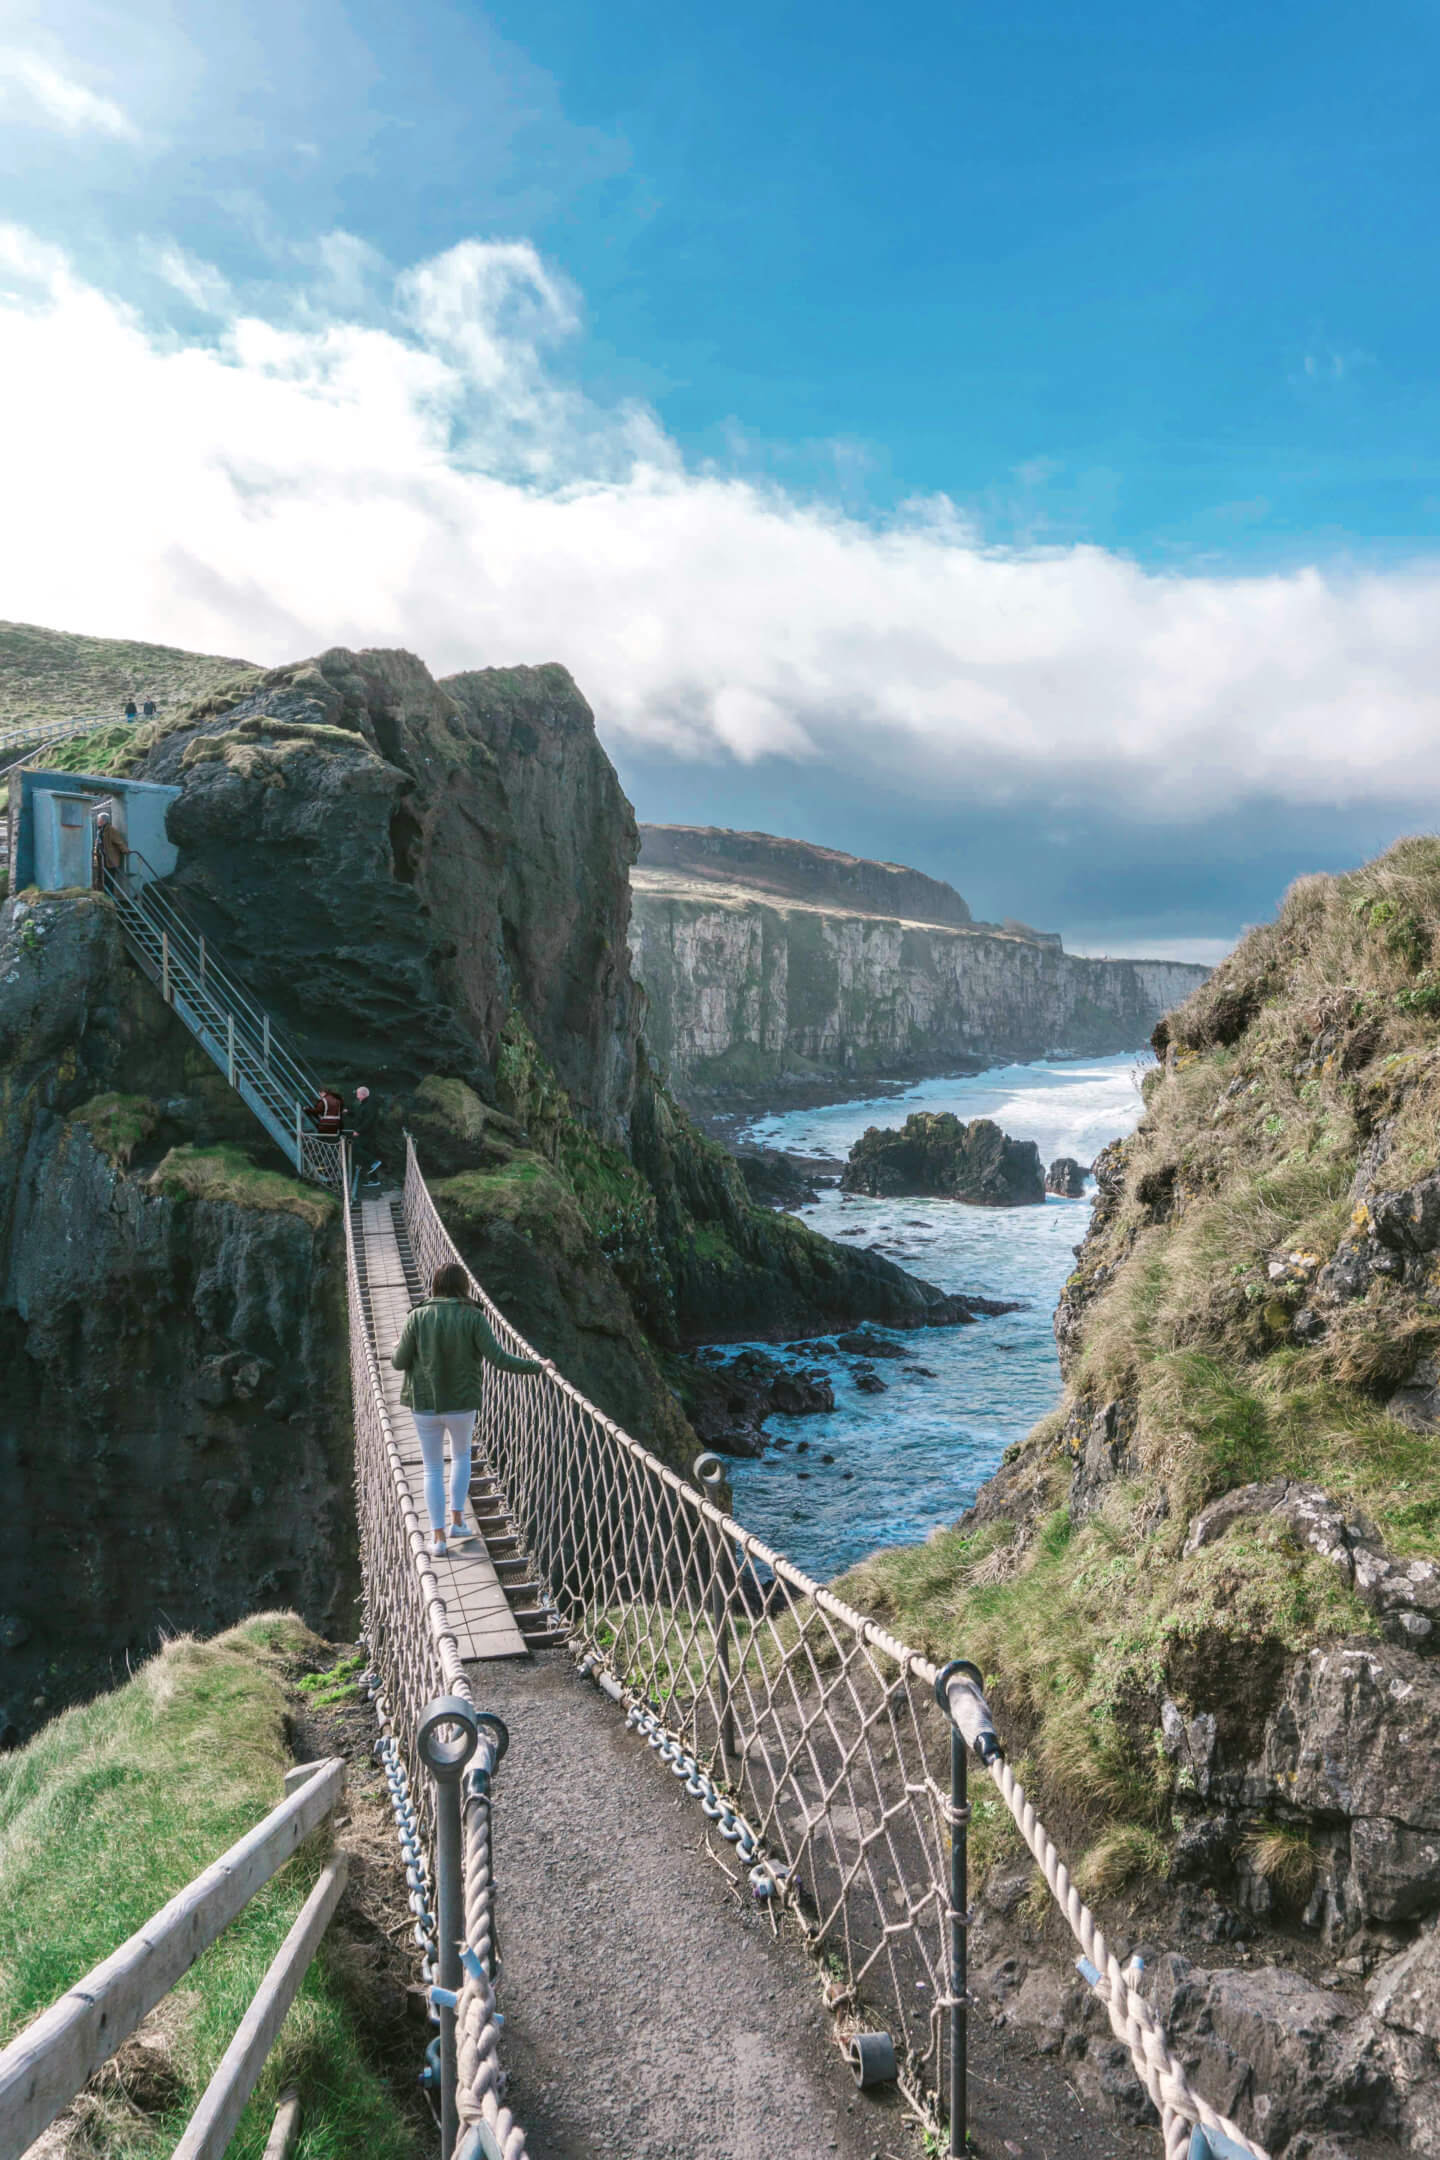 A Girl crosses the National Trust Carrick-a-Rede Rope Bridge - places to visit in Ireland